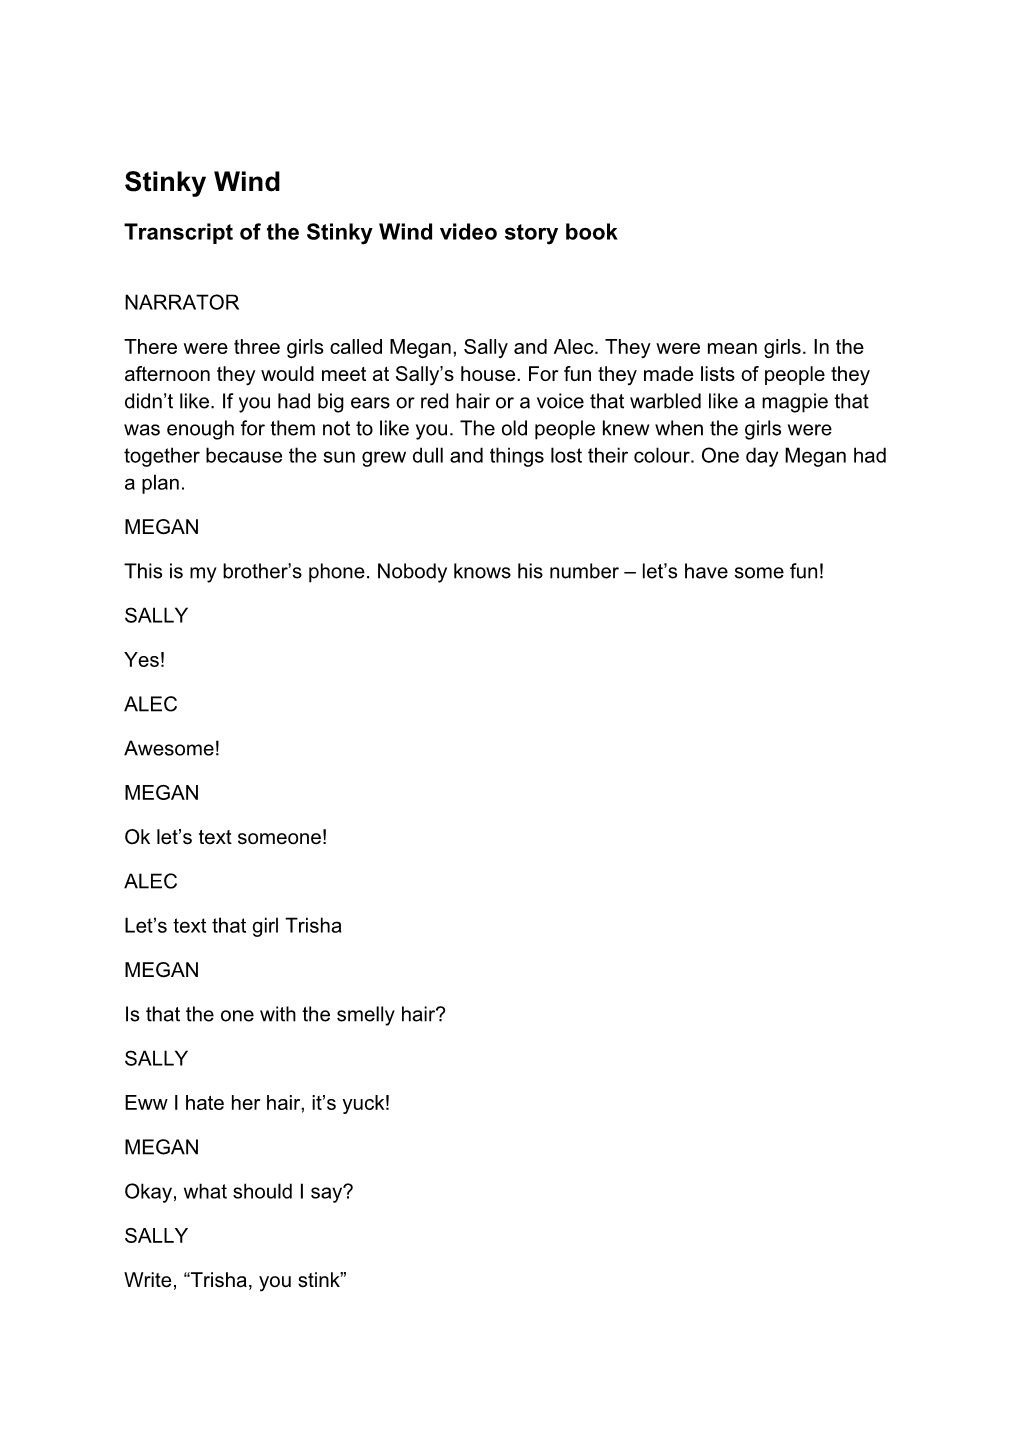 Transcript of the Stinky Wind Video Story Book